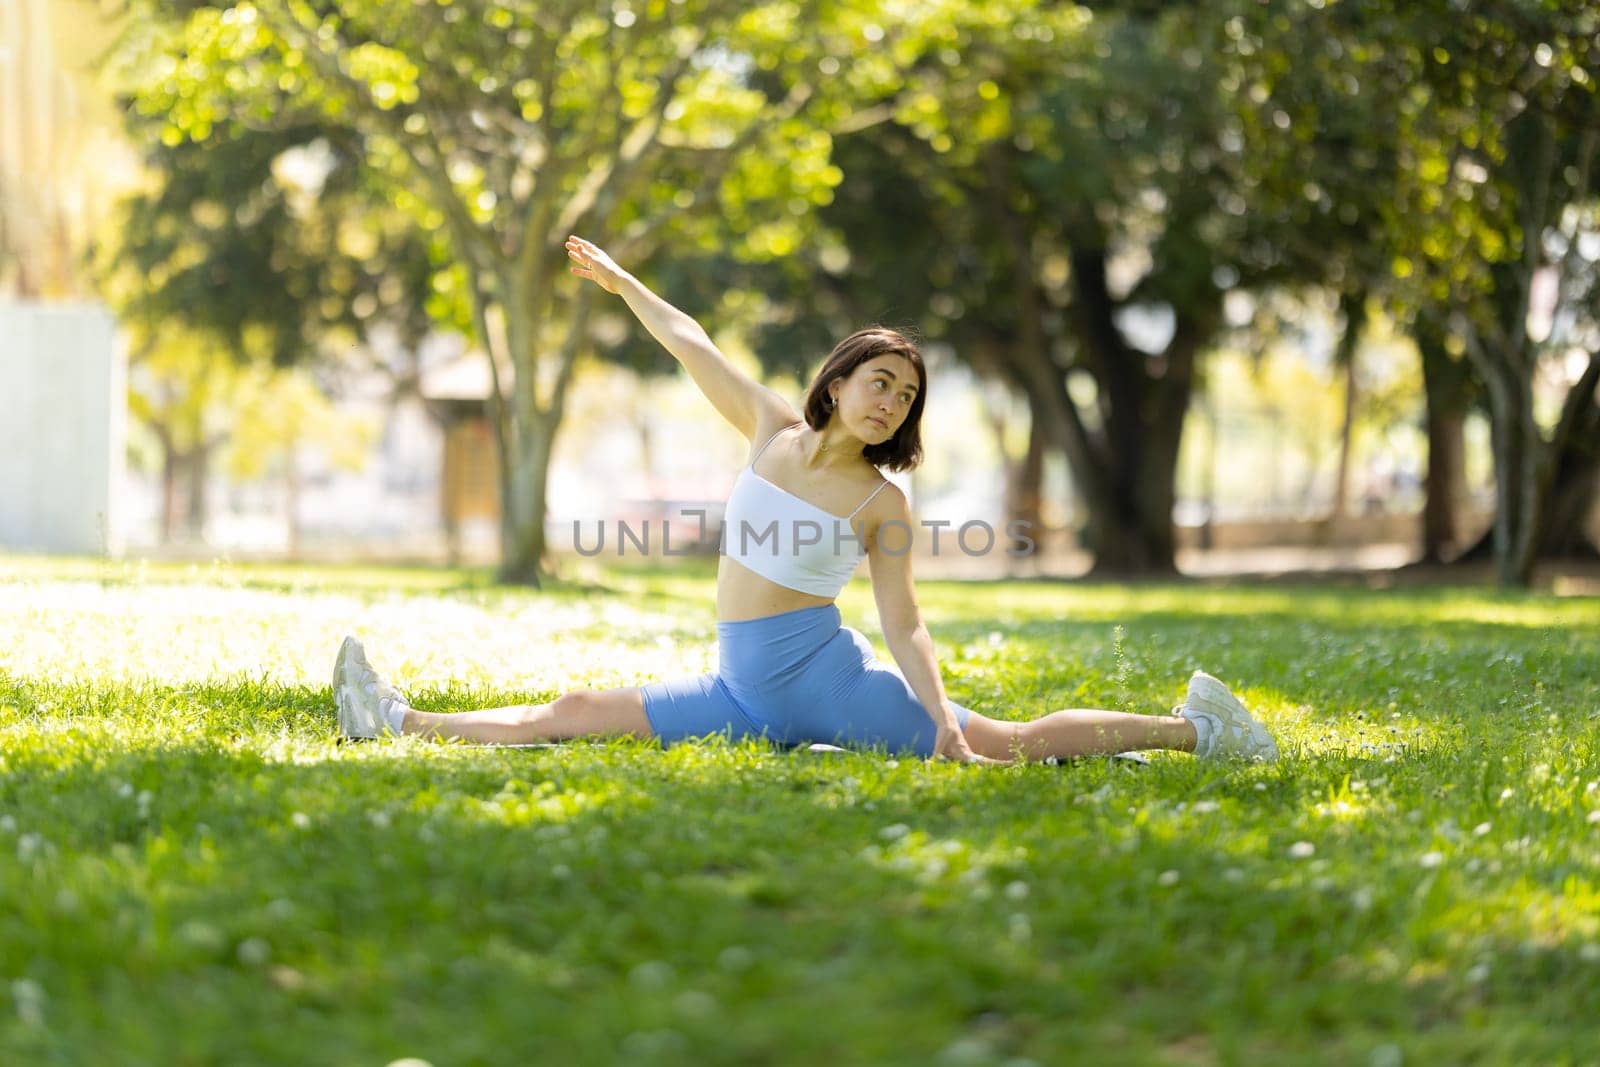 A woman is doing a yoga pose in a park. She is in a split position and is looking up. The scene is peaceful and serene, with the woman's focus on her pose and the surrounding greenery